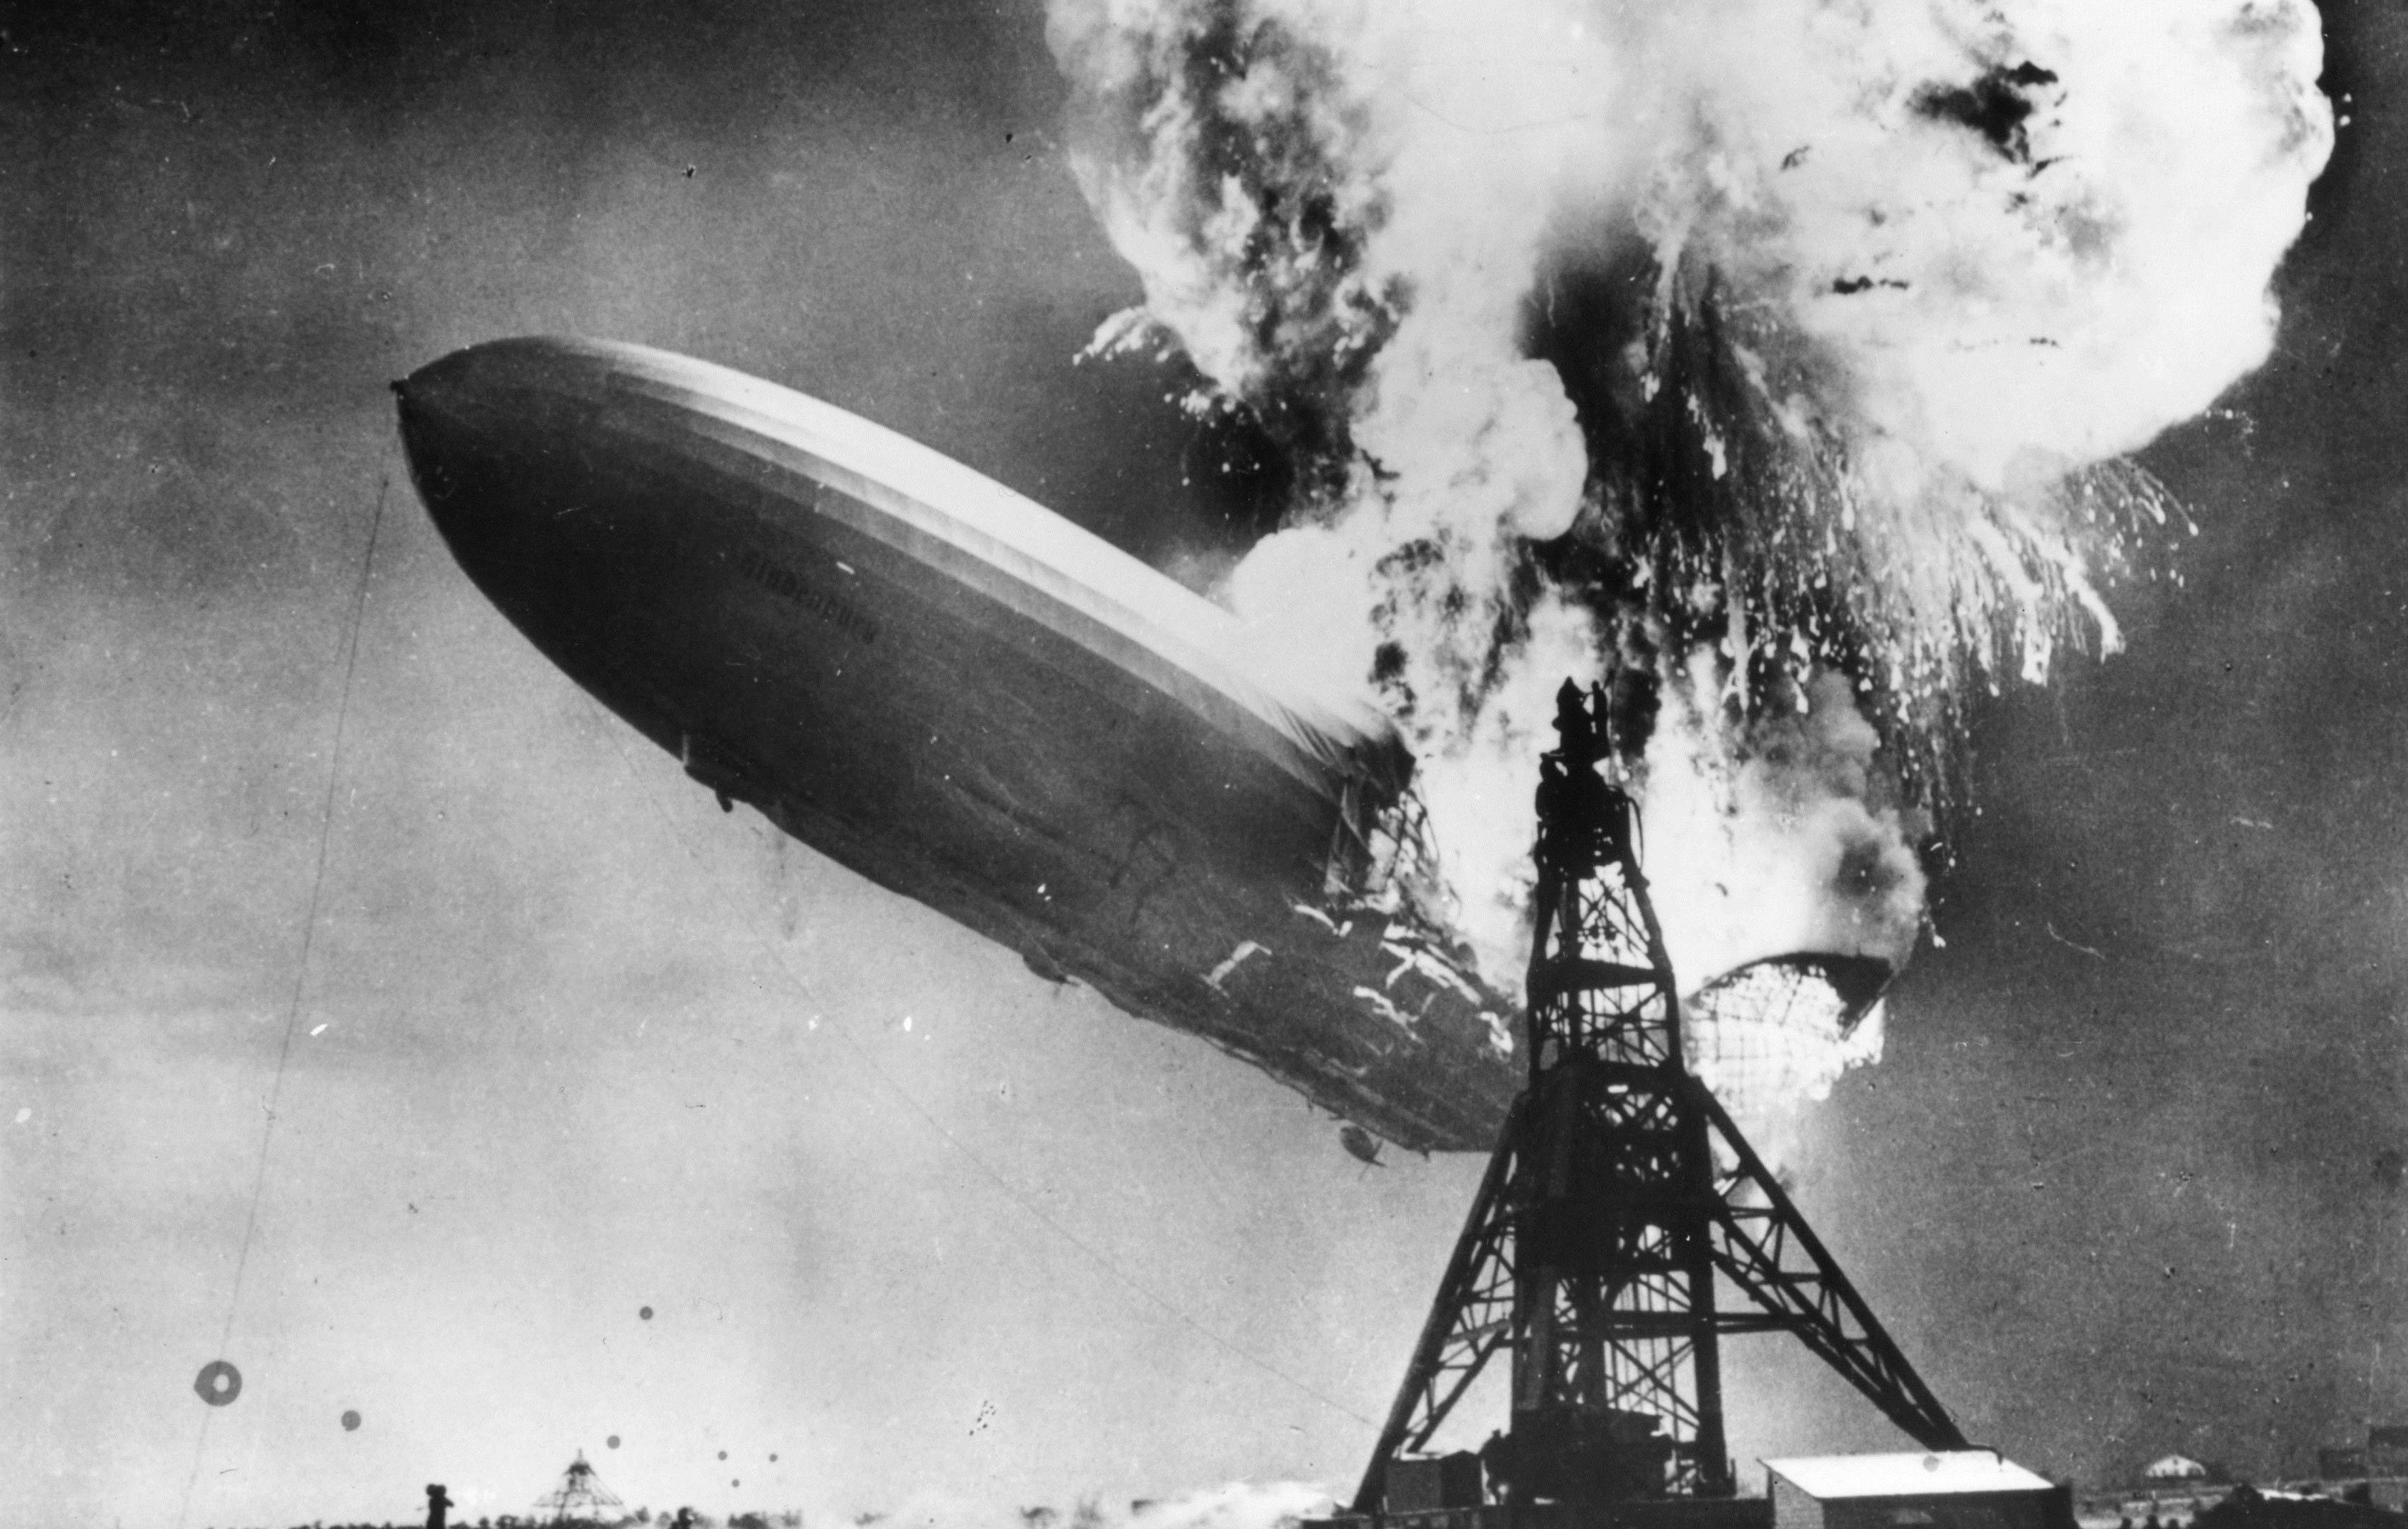 The Hindenburg disaster at Lakehurst, New Jersey, which marked the end of the era of passenger-carrying airships. (Sam Shere/Getty Images)